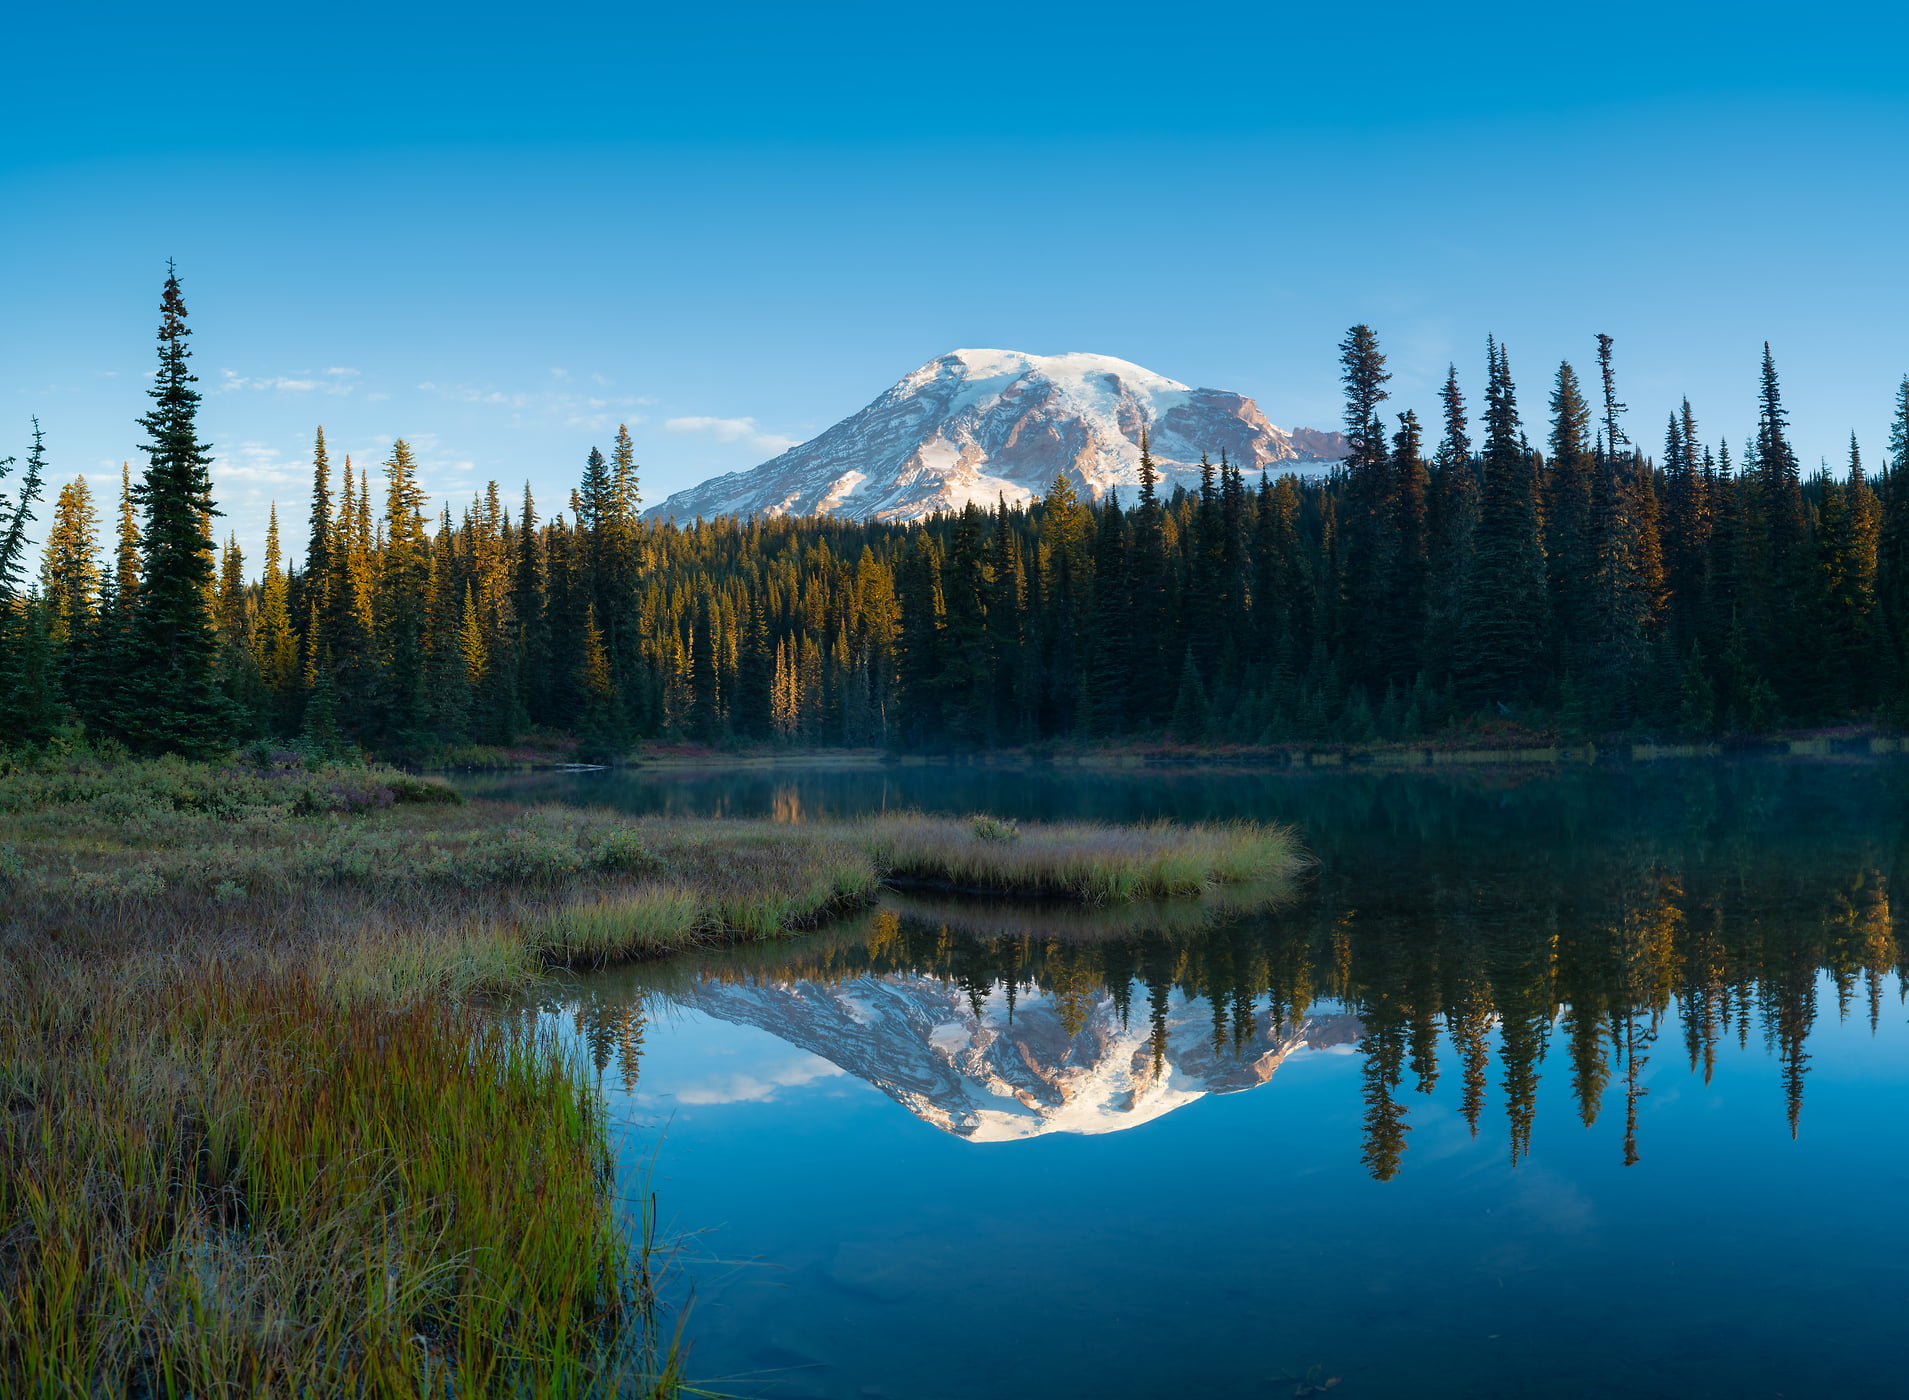 312 megapixels! A very high resolution, large-format VAST photo print of a mountain reflected in a lake; landscape photograph created by Greg Probst at Reflection Lake in Mount Rainier National Park, Washington